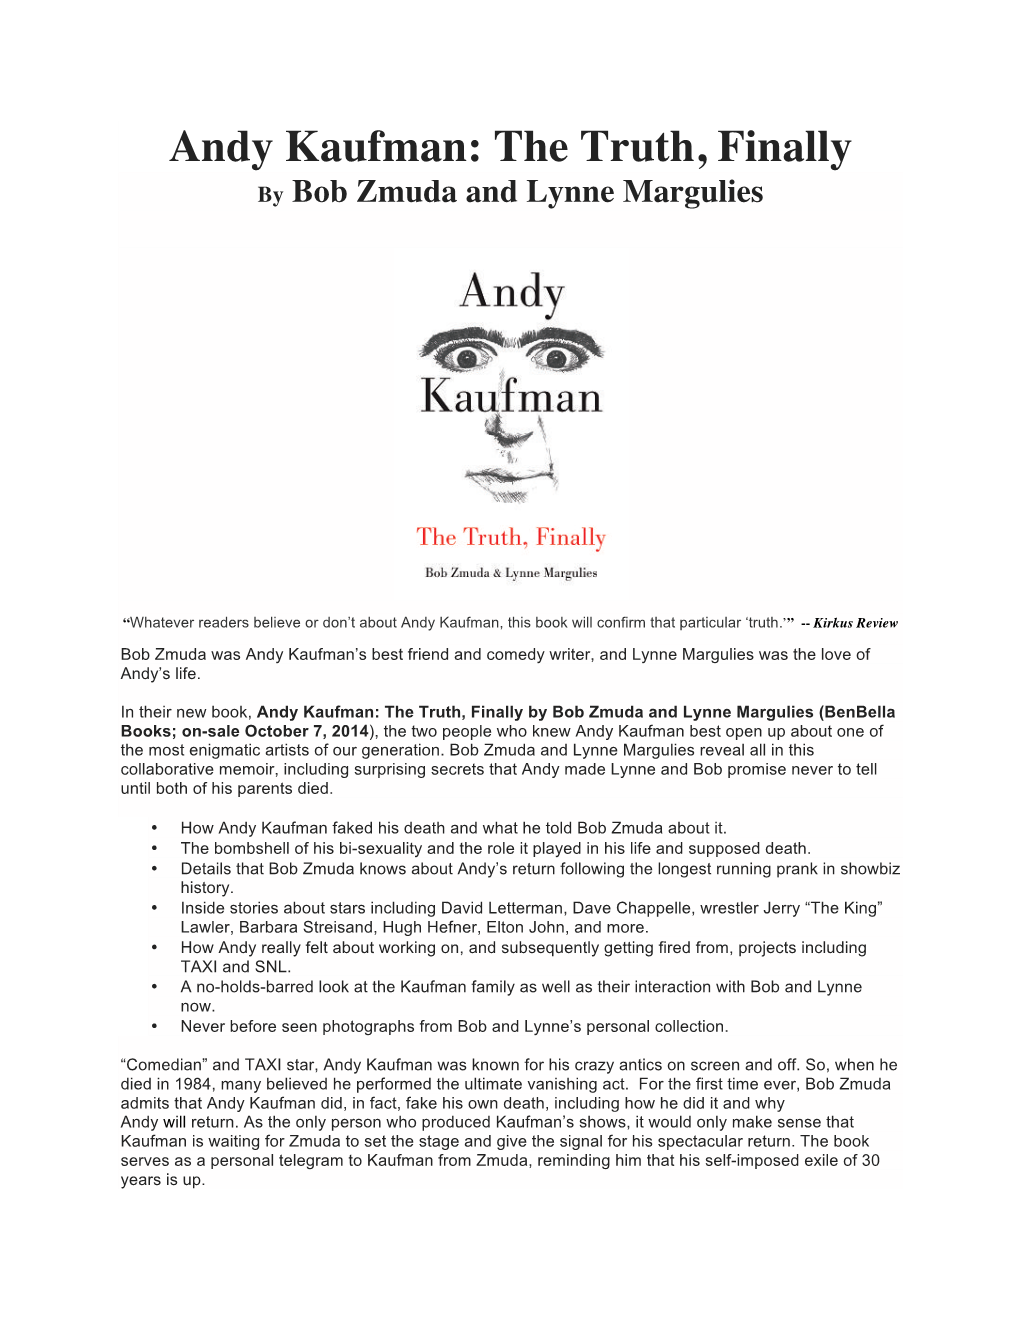 The Truth, Finally by Bob Zmuda and Lynne Margulies